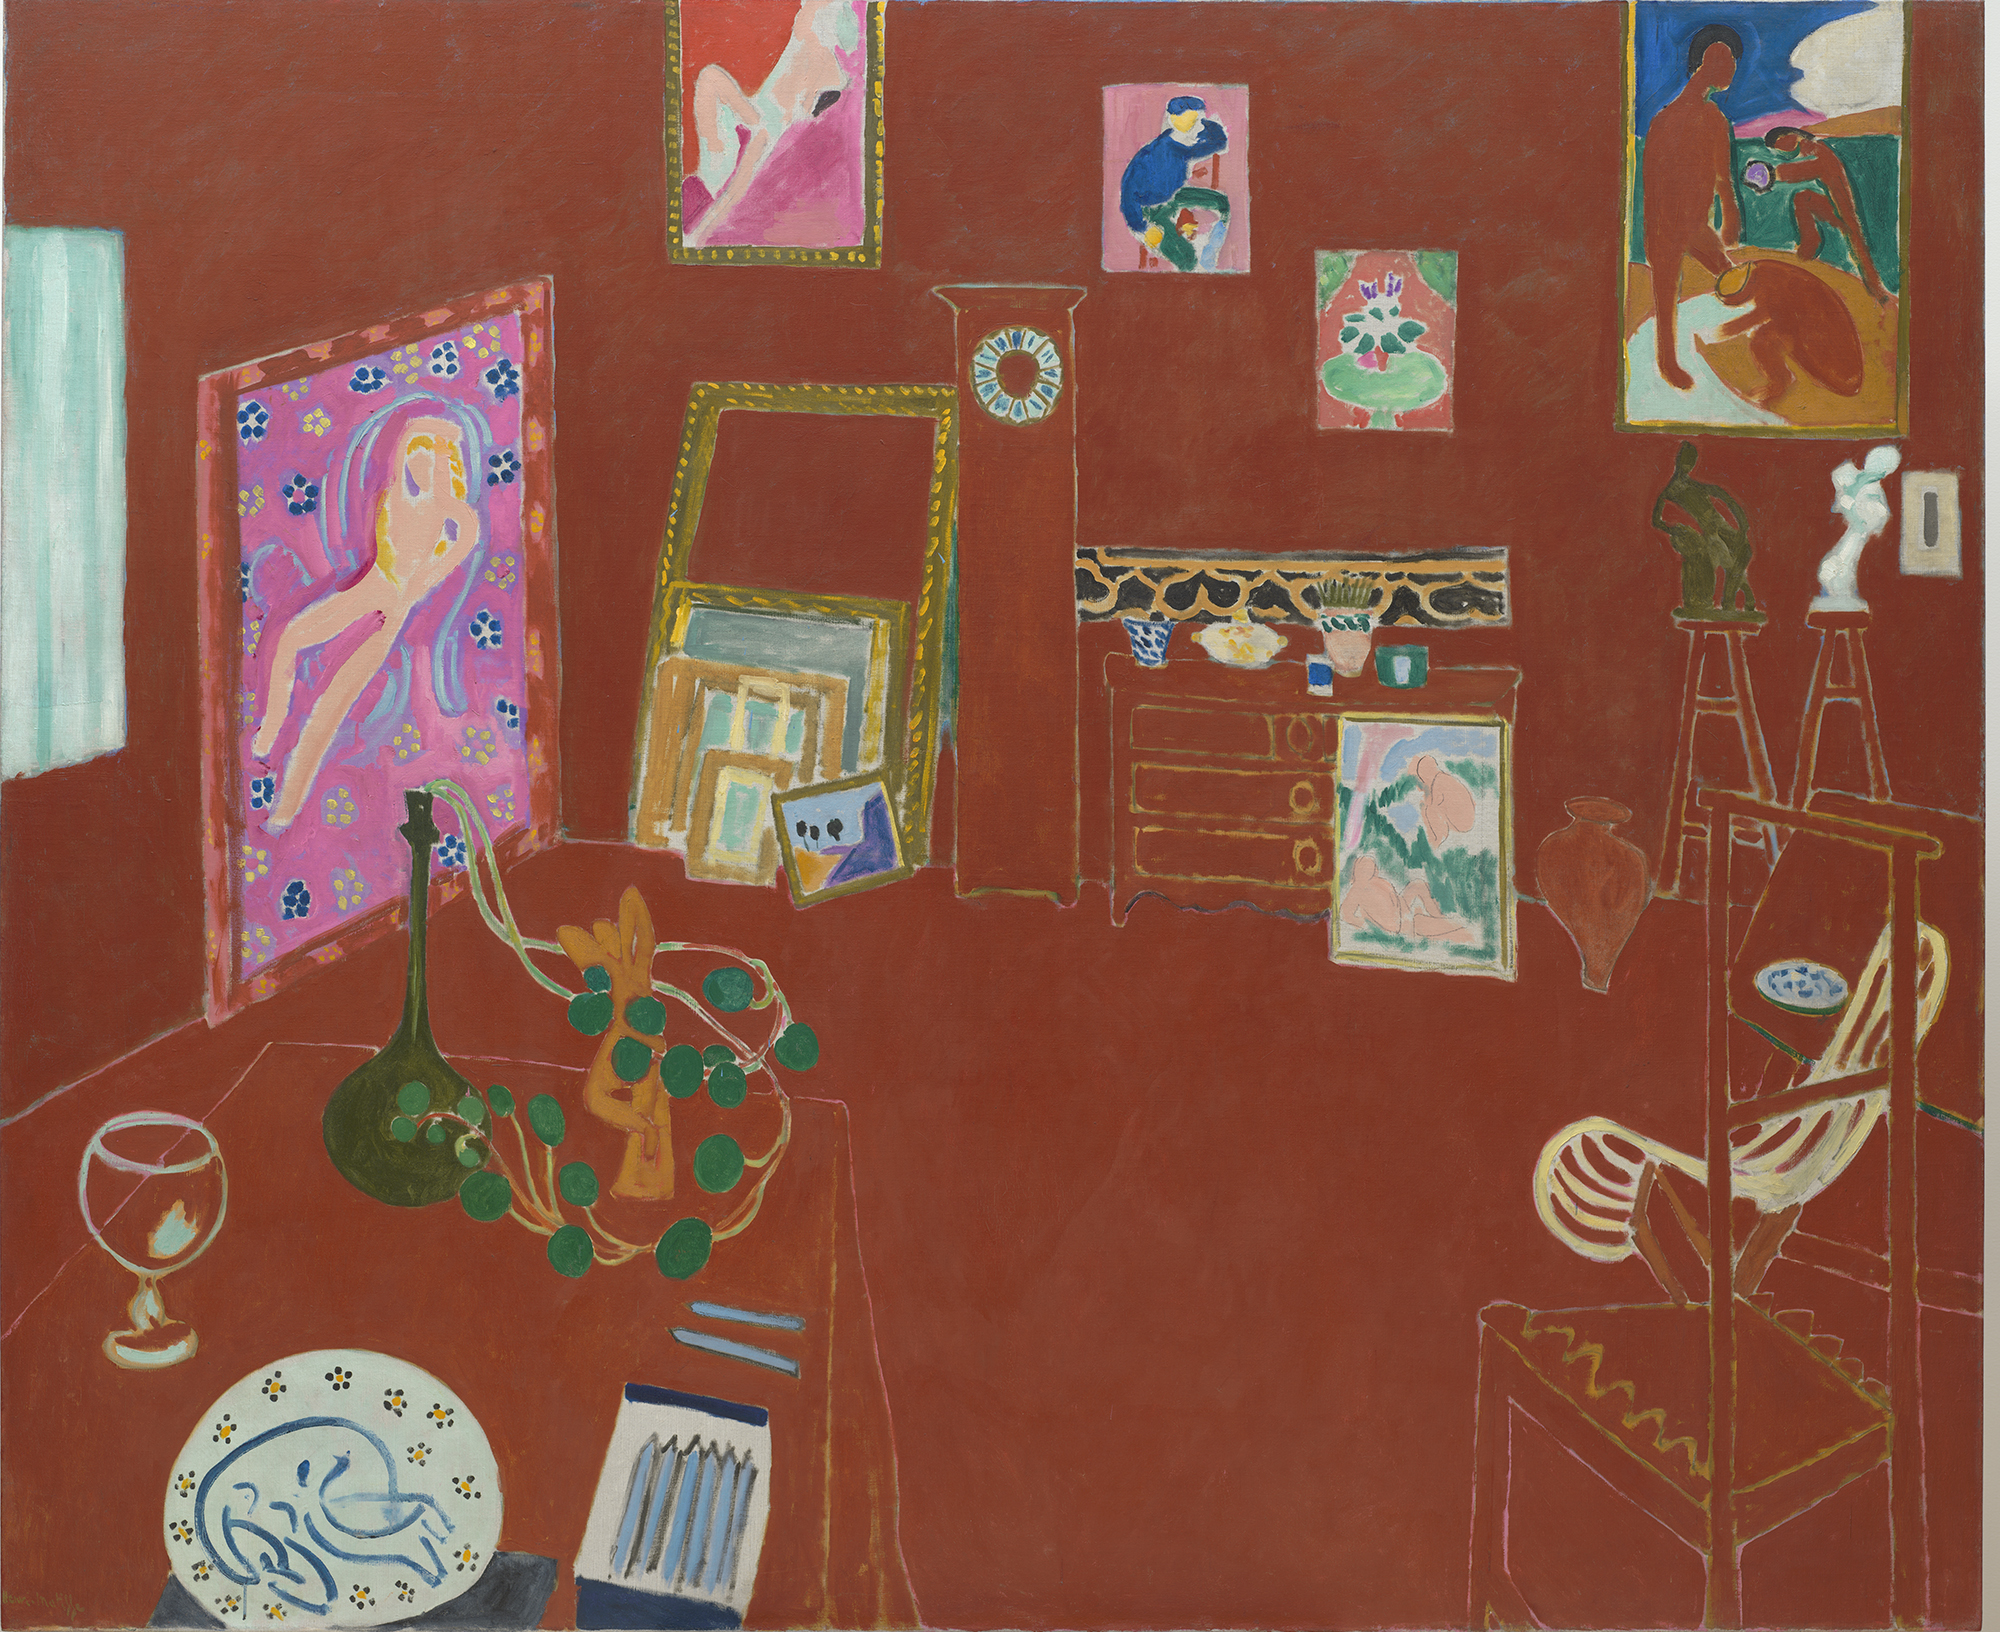 Henri Matisse. The Red Studio. 1911. Oil on canvas, 71 1/4″ x 7′ 2 1/4″ (181